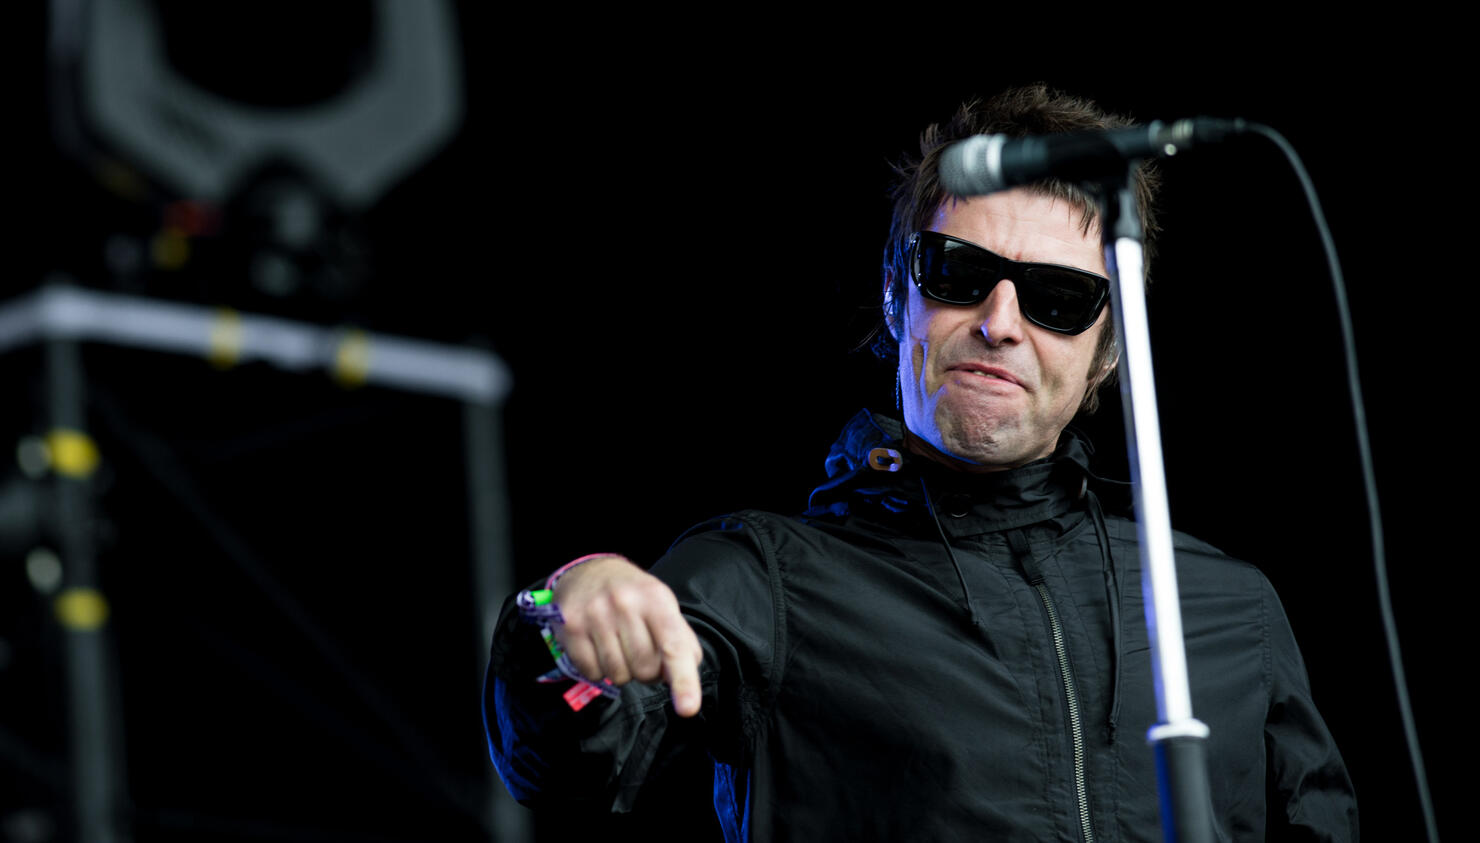 Watch Liam Gallagher React Reasonably After a Fish Is Thrown on Stage ...